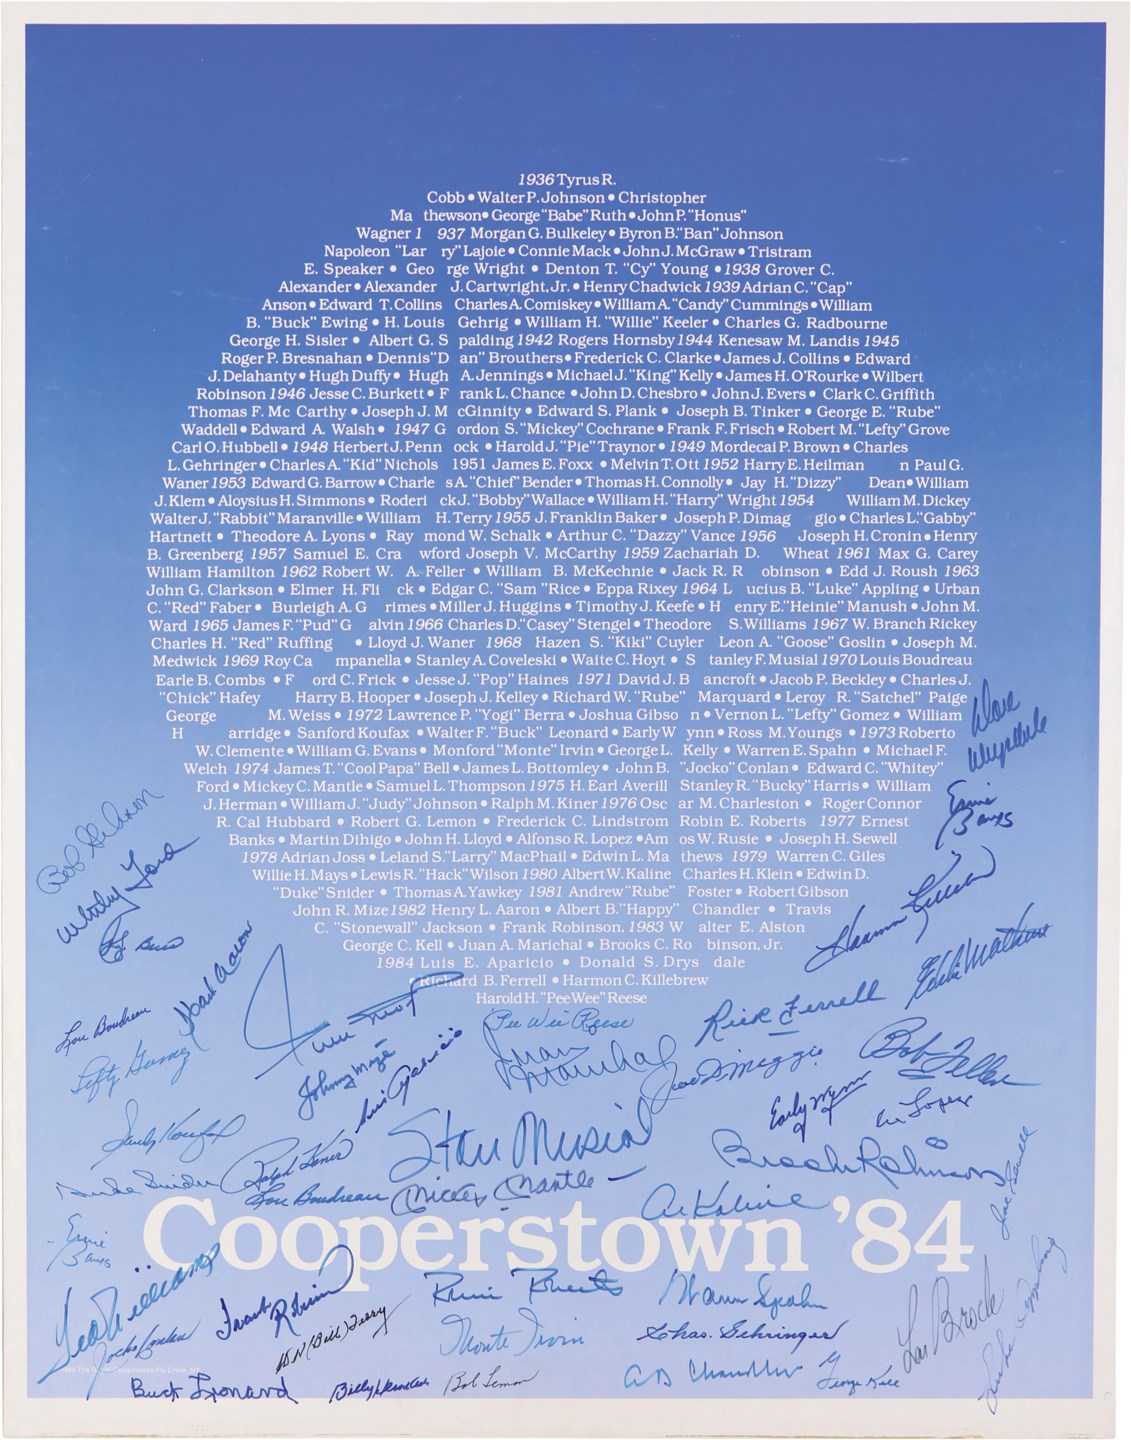 Baseball Autographs - Cooperstown HOFers Mutli-Signed Poster w/Mays, Mantle & Williams (PSA)